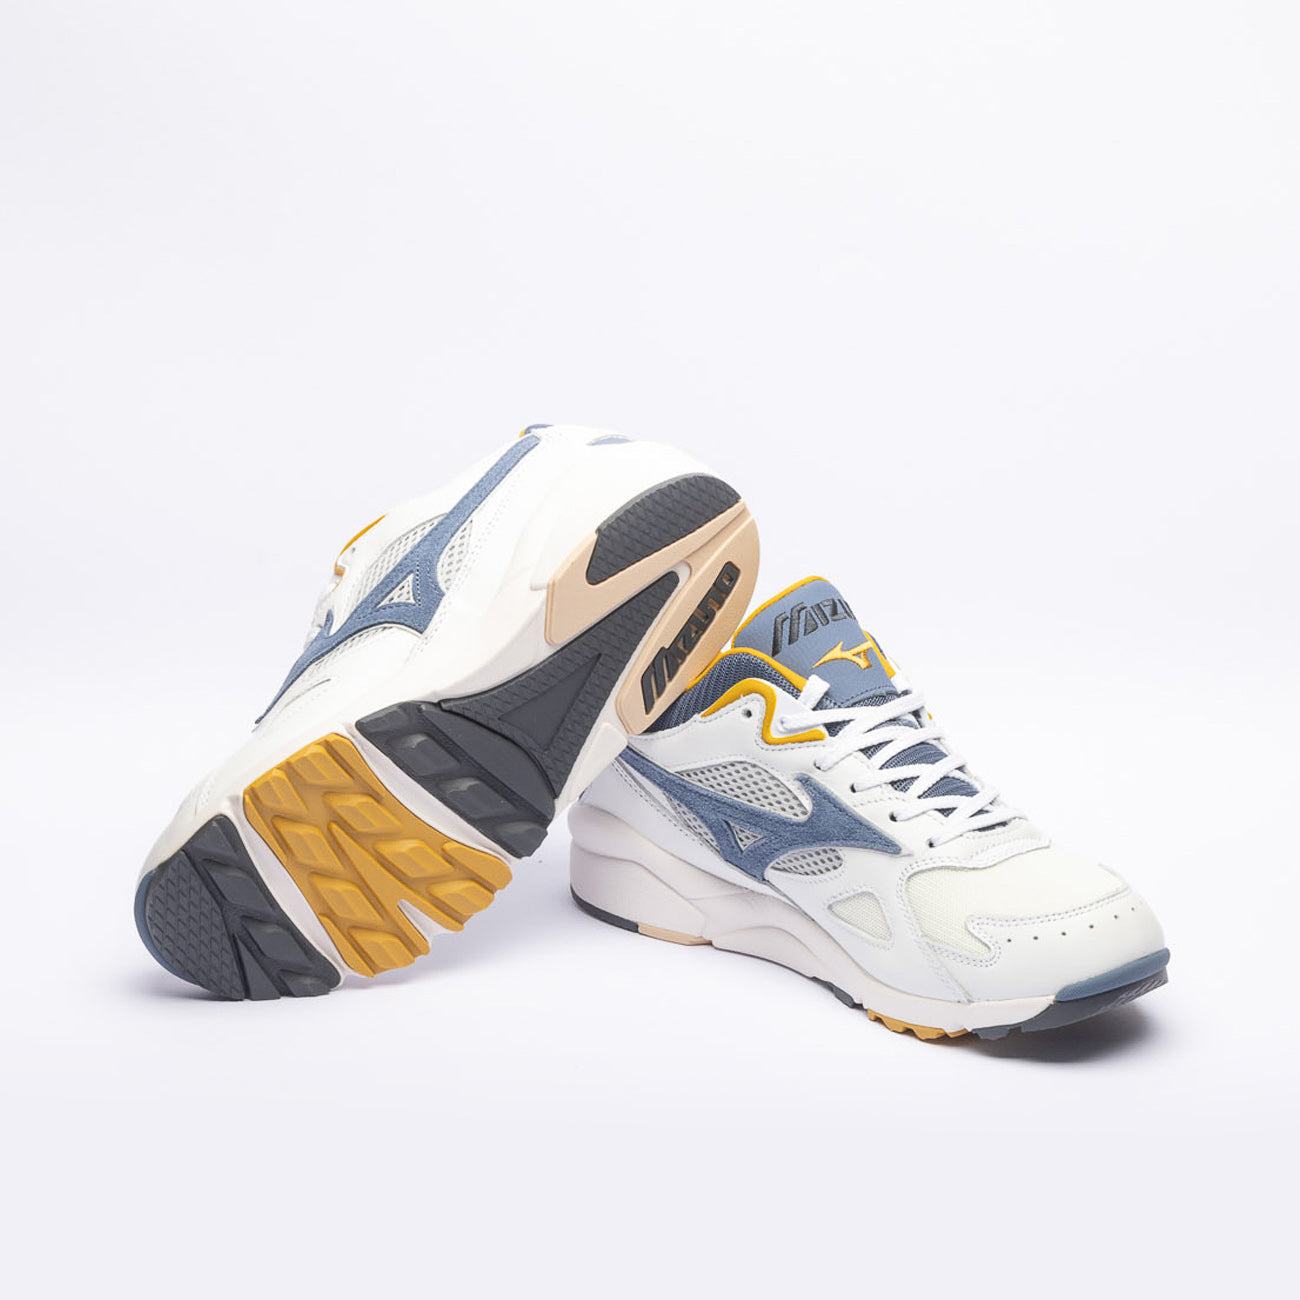 Mizuno Sky Medal running sneakers in white leather and fabric with blue details